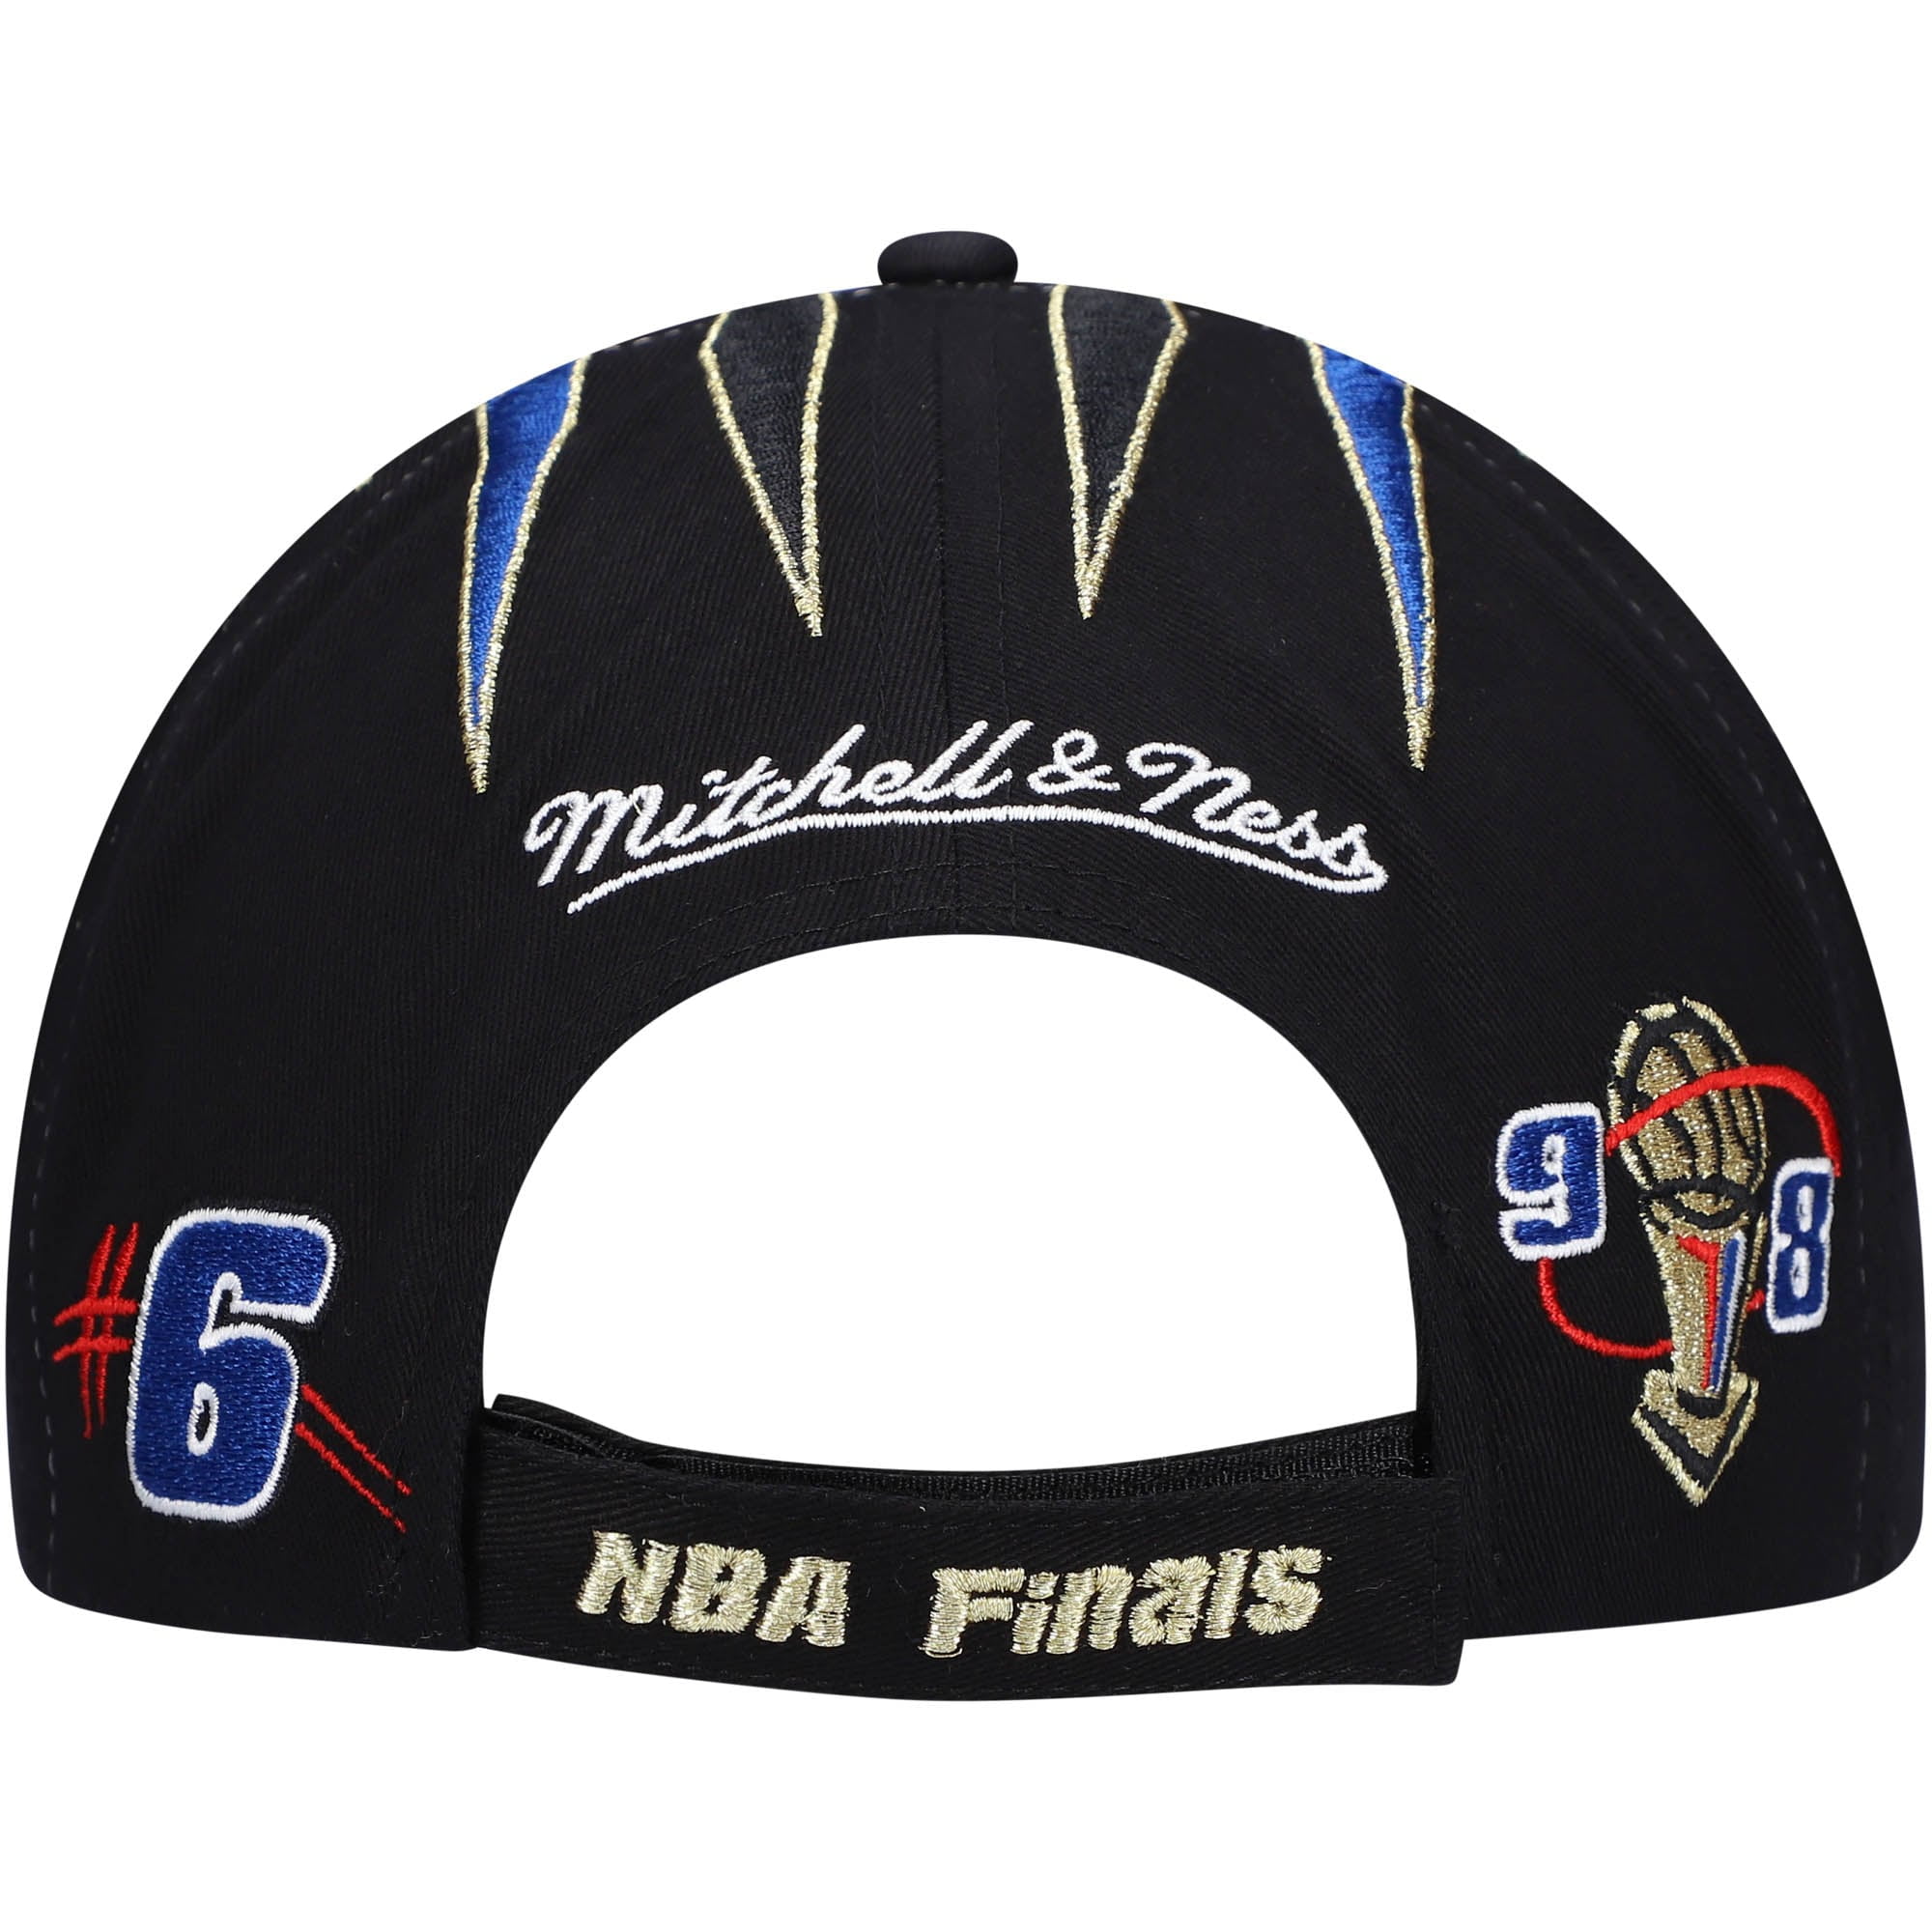 Men's Mitchell & Ness Gray Chicago Bulls Hardwood Classics 1998 NBA Finals Sunny Gray Fitted Hat